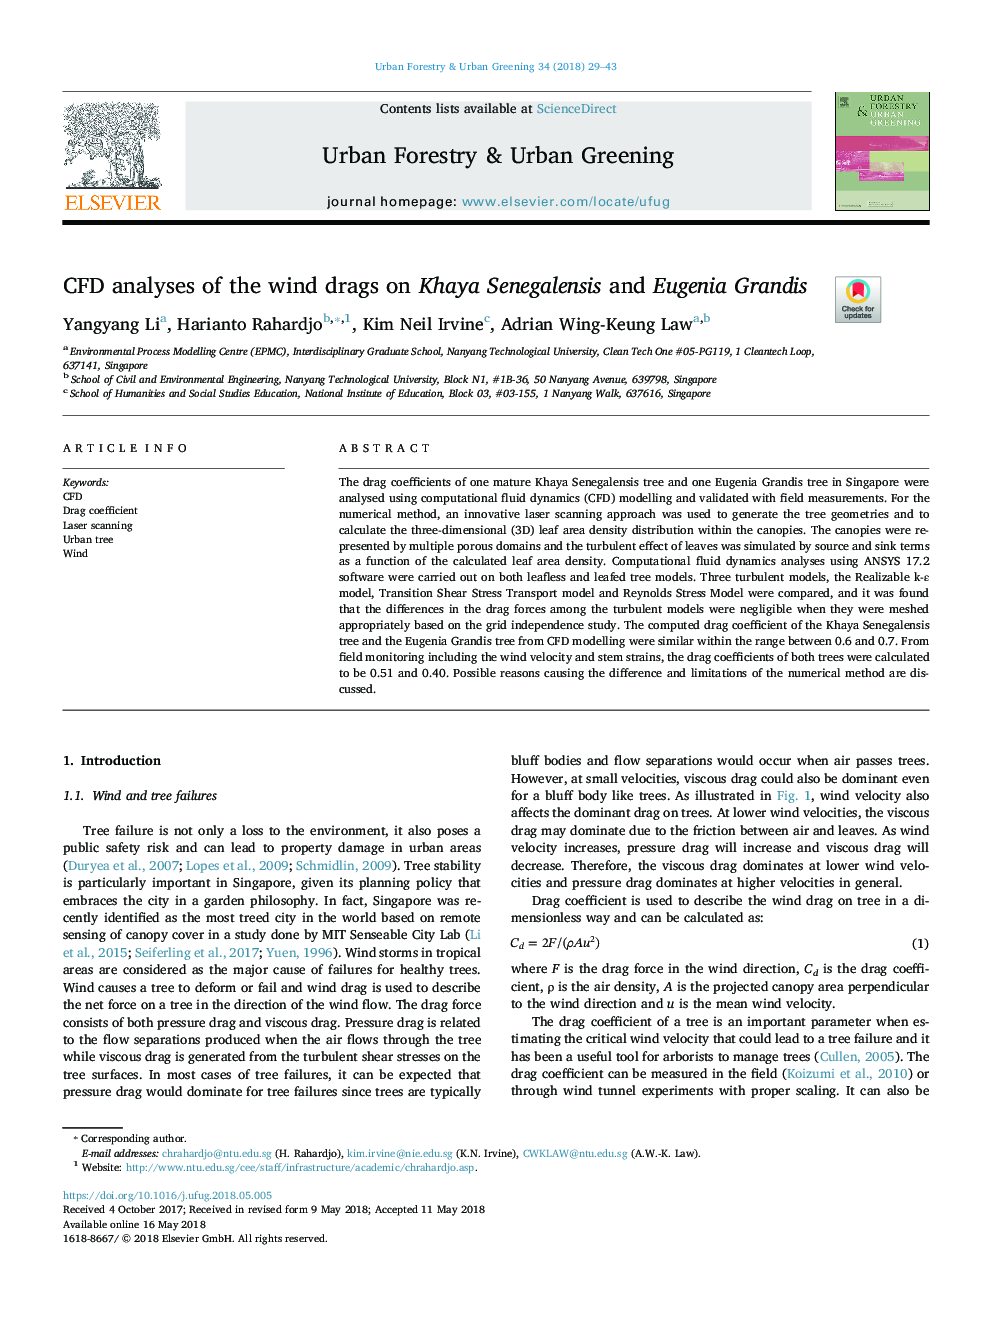 CFD analyses of the wind drags on Khaya Senegalensis and Eugenia Grandis